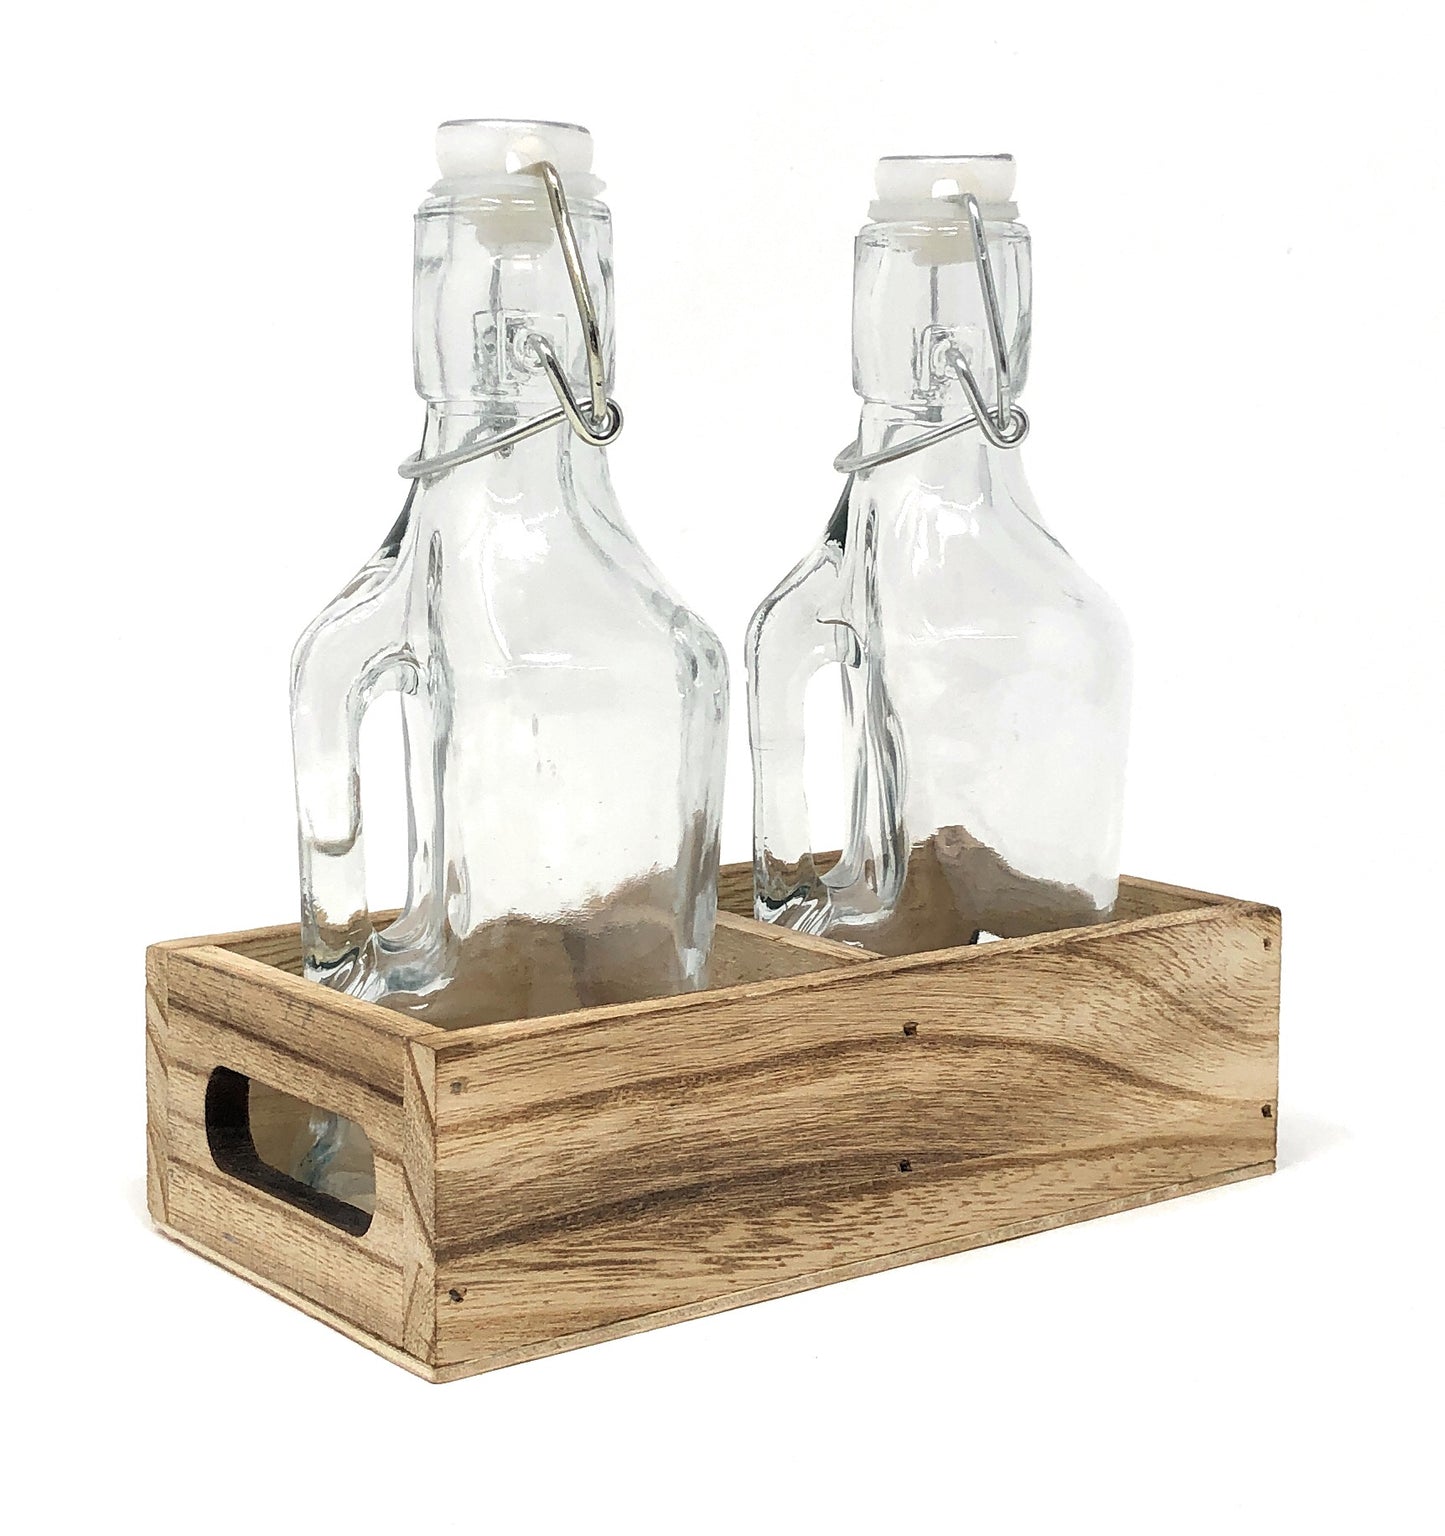 Oil and Vinegar Dispenser Set Cruet Glass Bottles with Swing Top and Wood Caddy for Salad Dressing Condiments, Rustic and Farmhouse Kitchen Decor